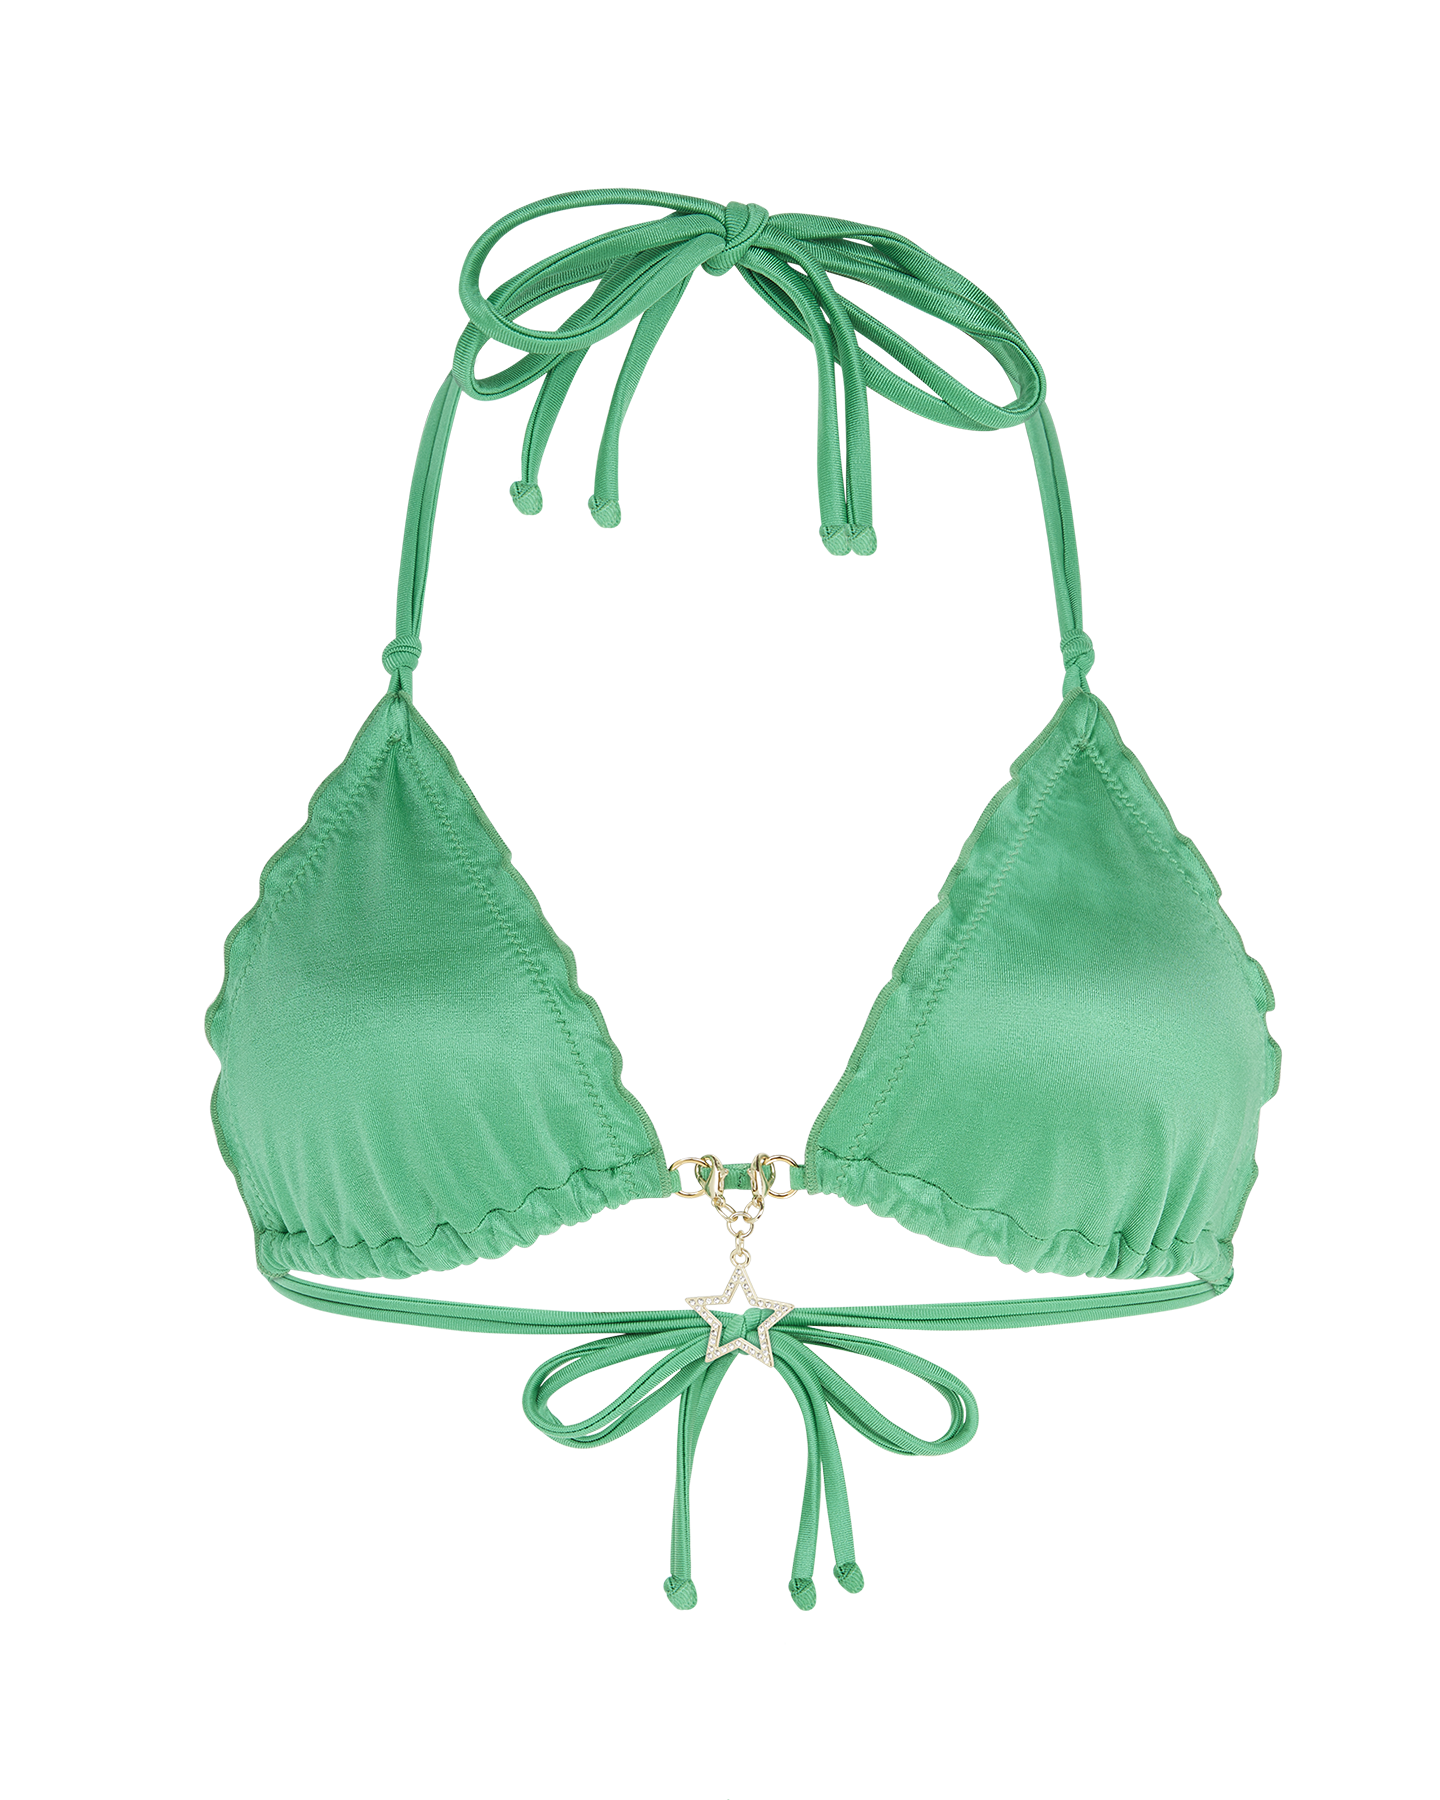 Berry 1 Bikini Top | By Agent Provocateur